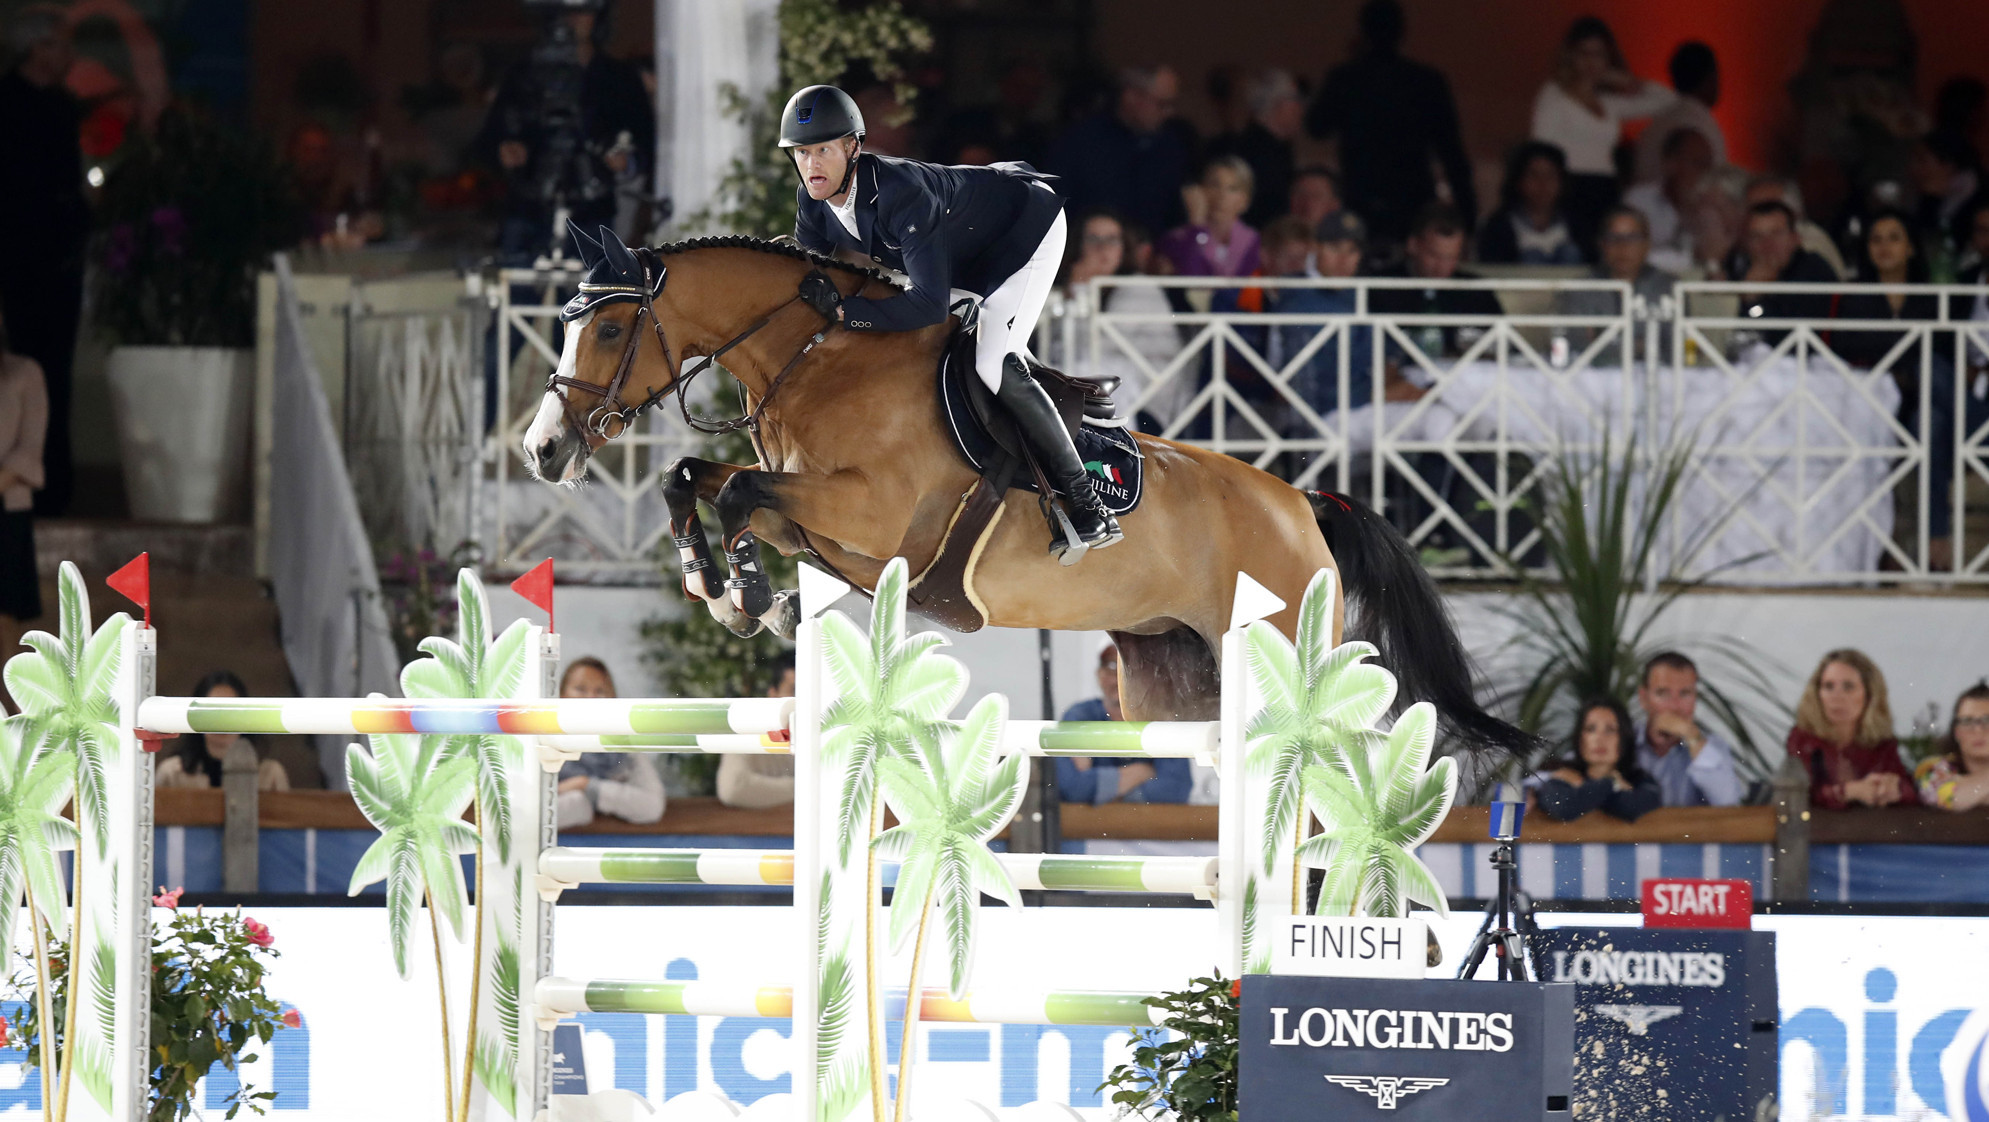 Belgium's Niels Bruynseels was the victor at the Longines Global Champions Tour event in Cannes ©LGCT